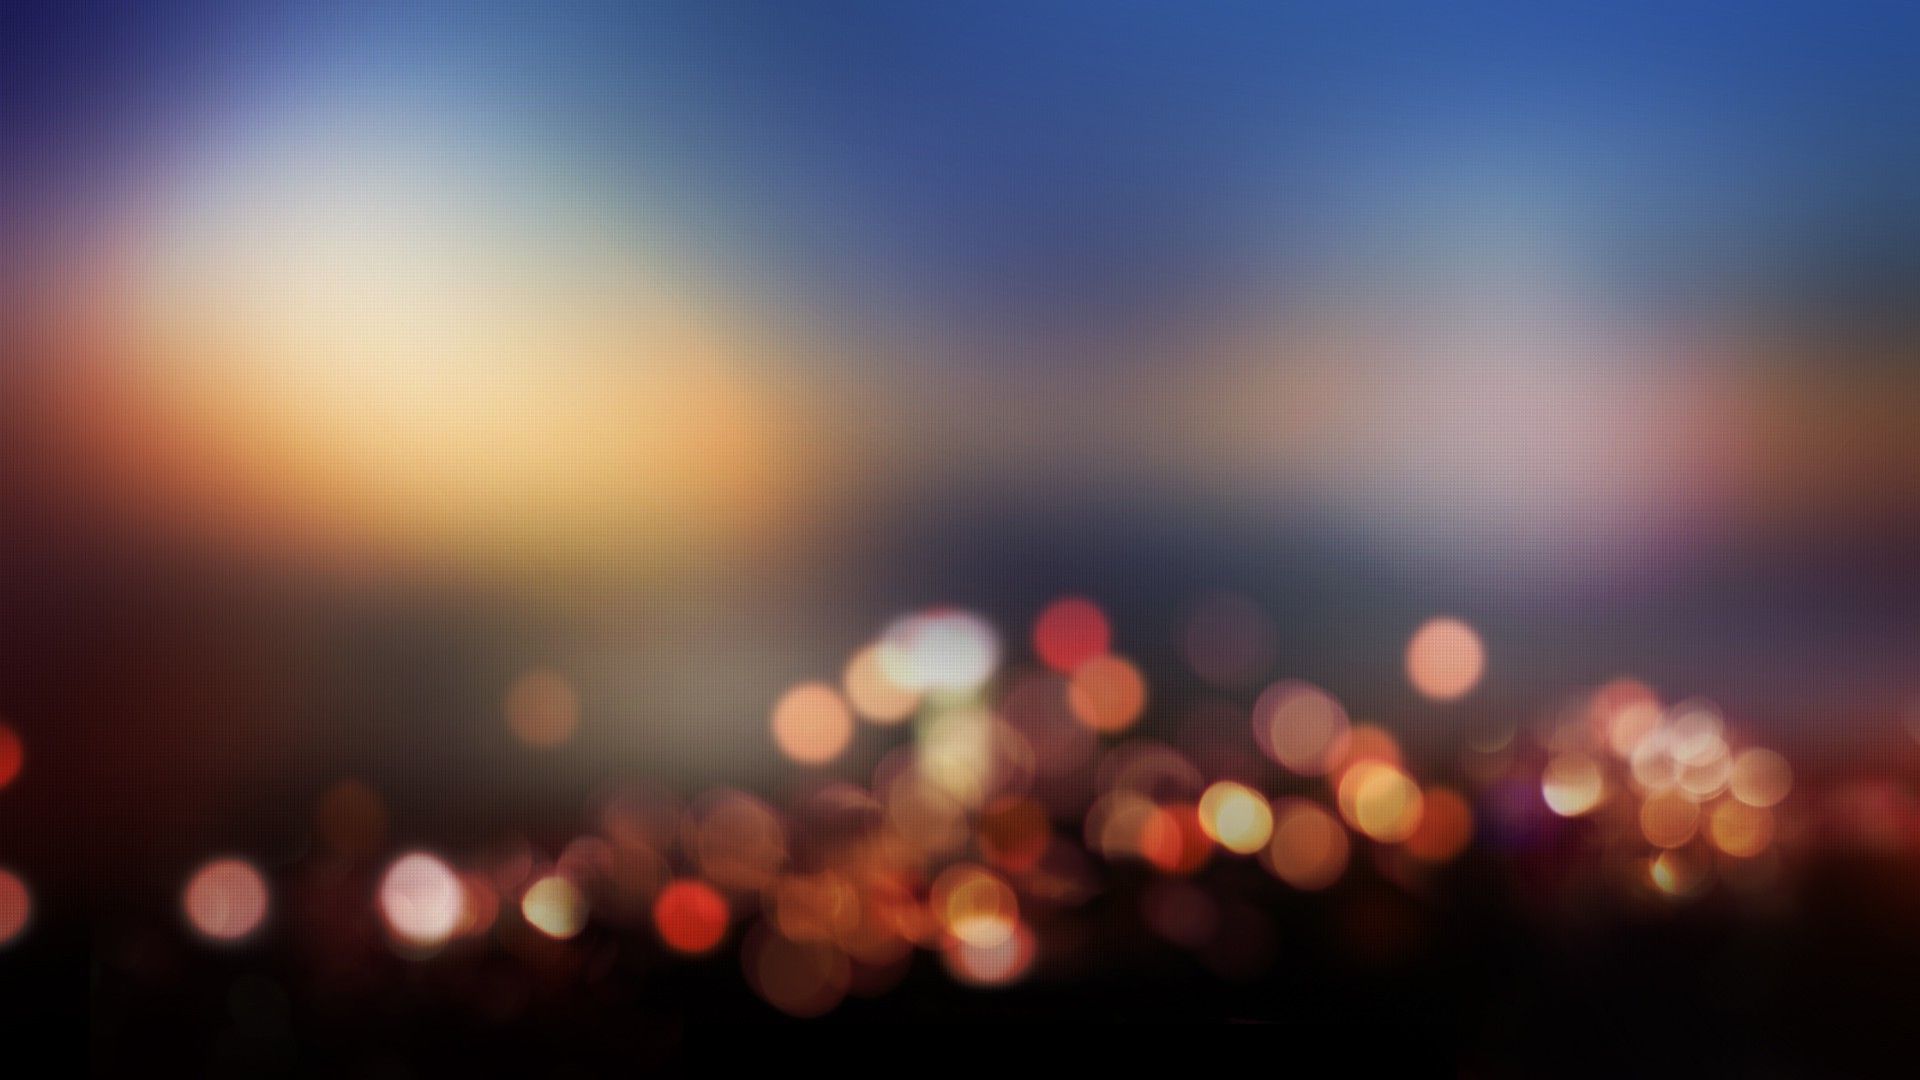 blurred-city-lights-photography-hd-wallpaper-1920×1080-9111 « ENQWEST